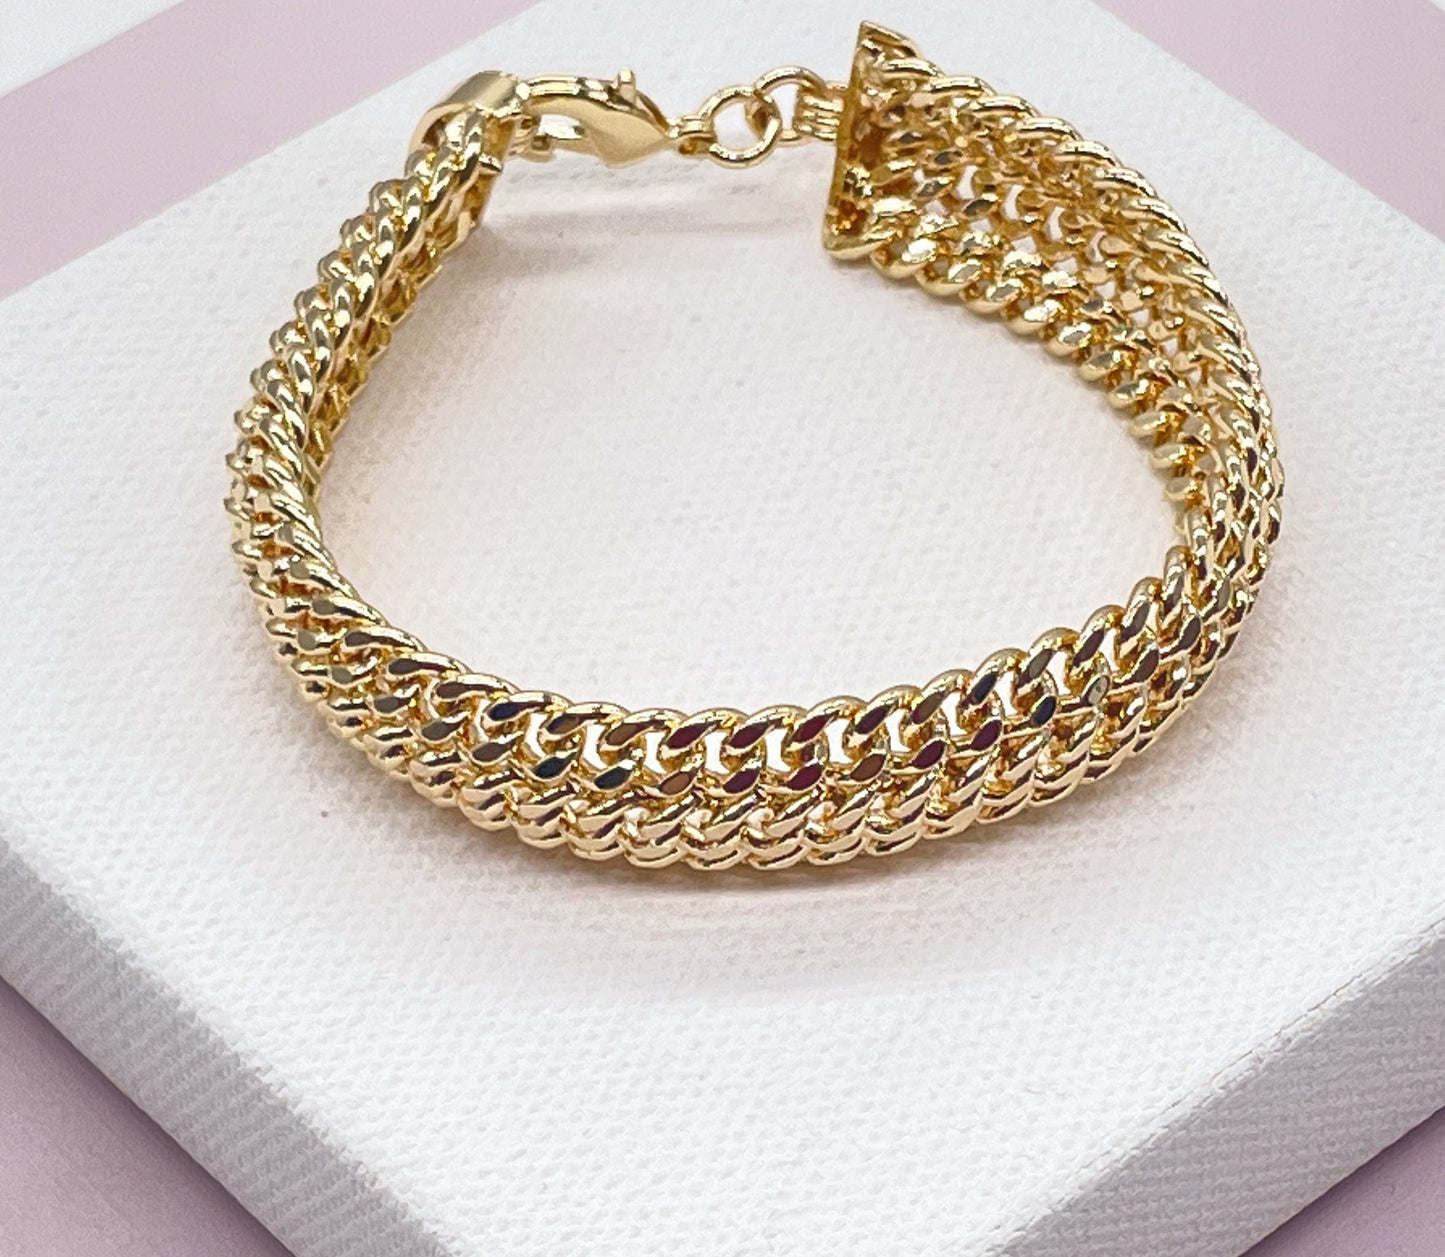 18K Gold Layered Thick Bracelet Feature Three Cuban Link Connected Side by Side